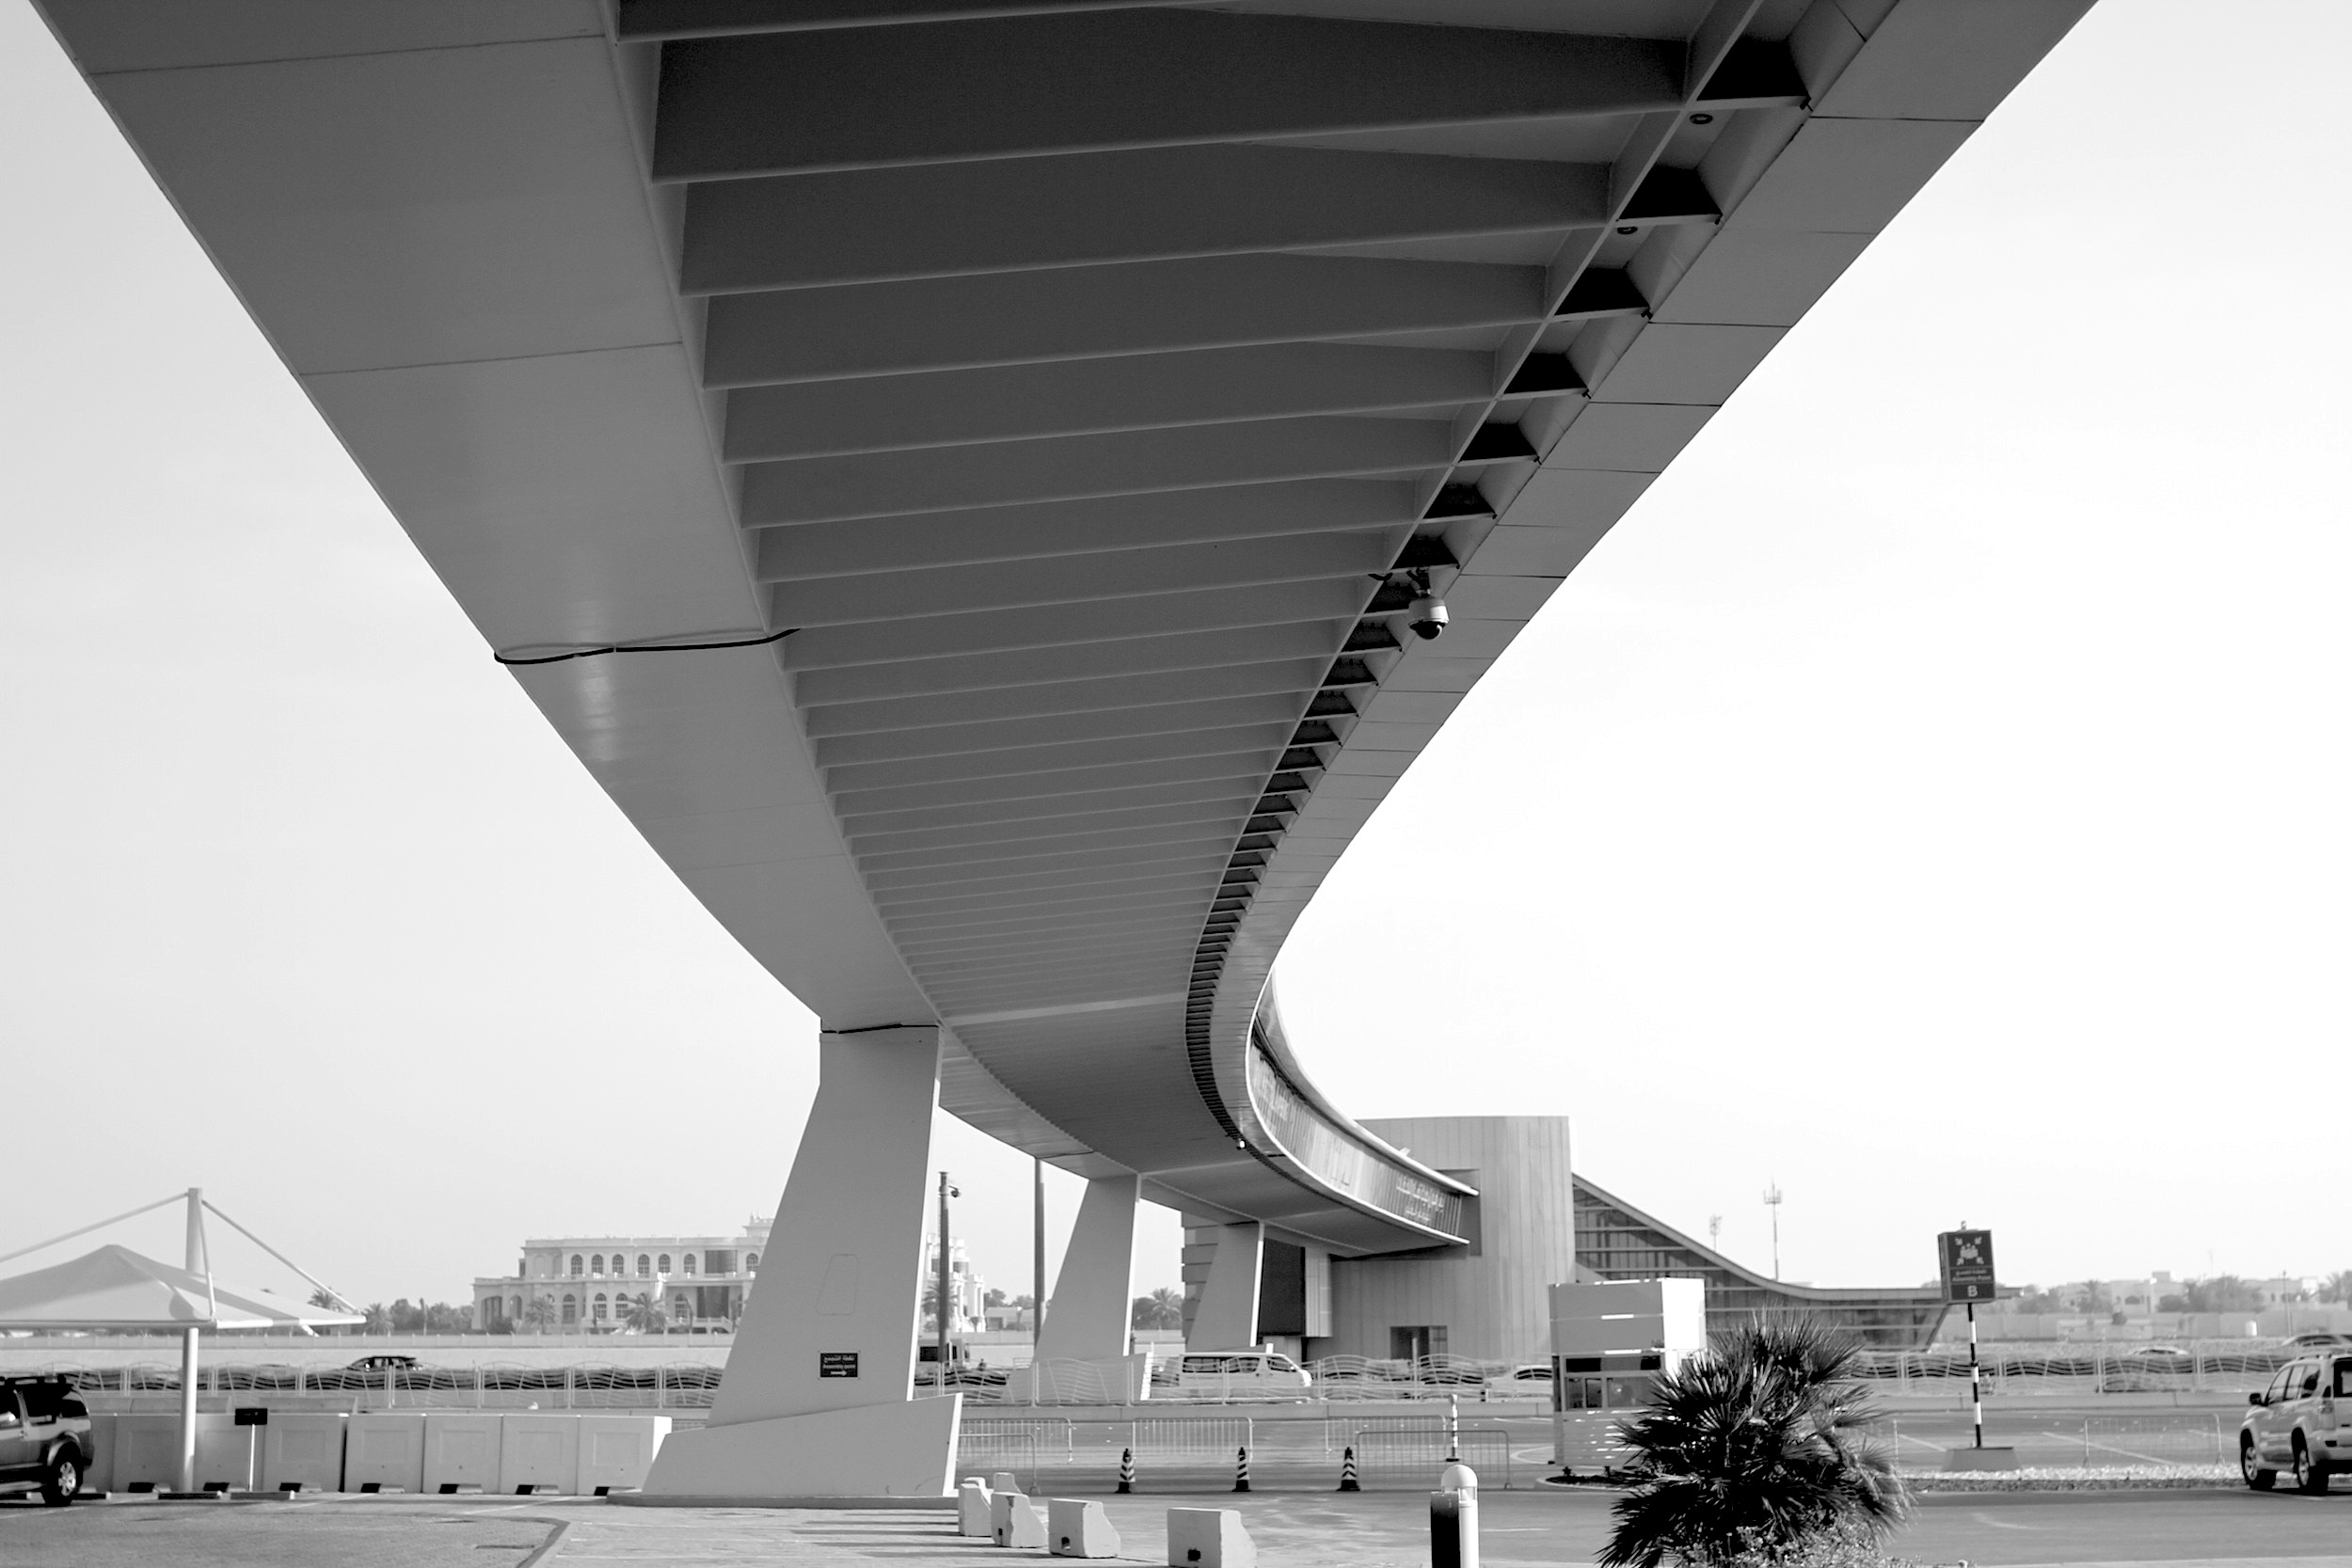 The Pedestrian Bridge by Dissing + Weitling at the ADNEC site.